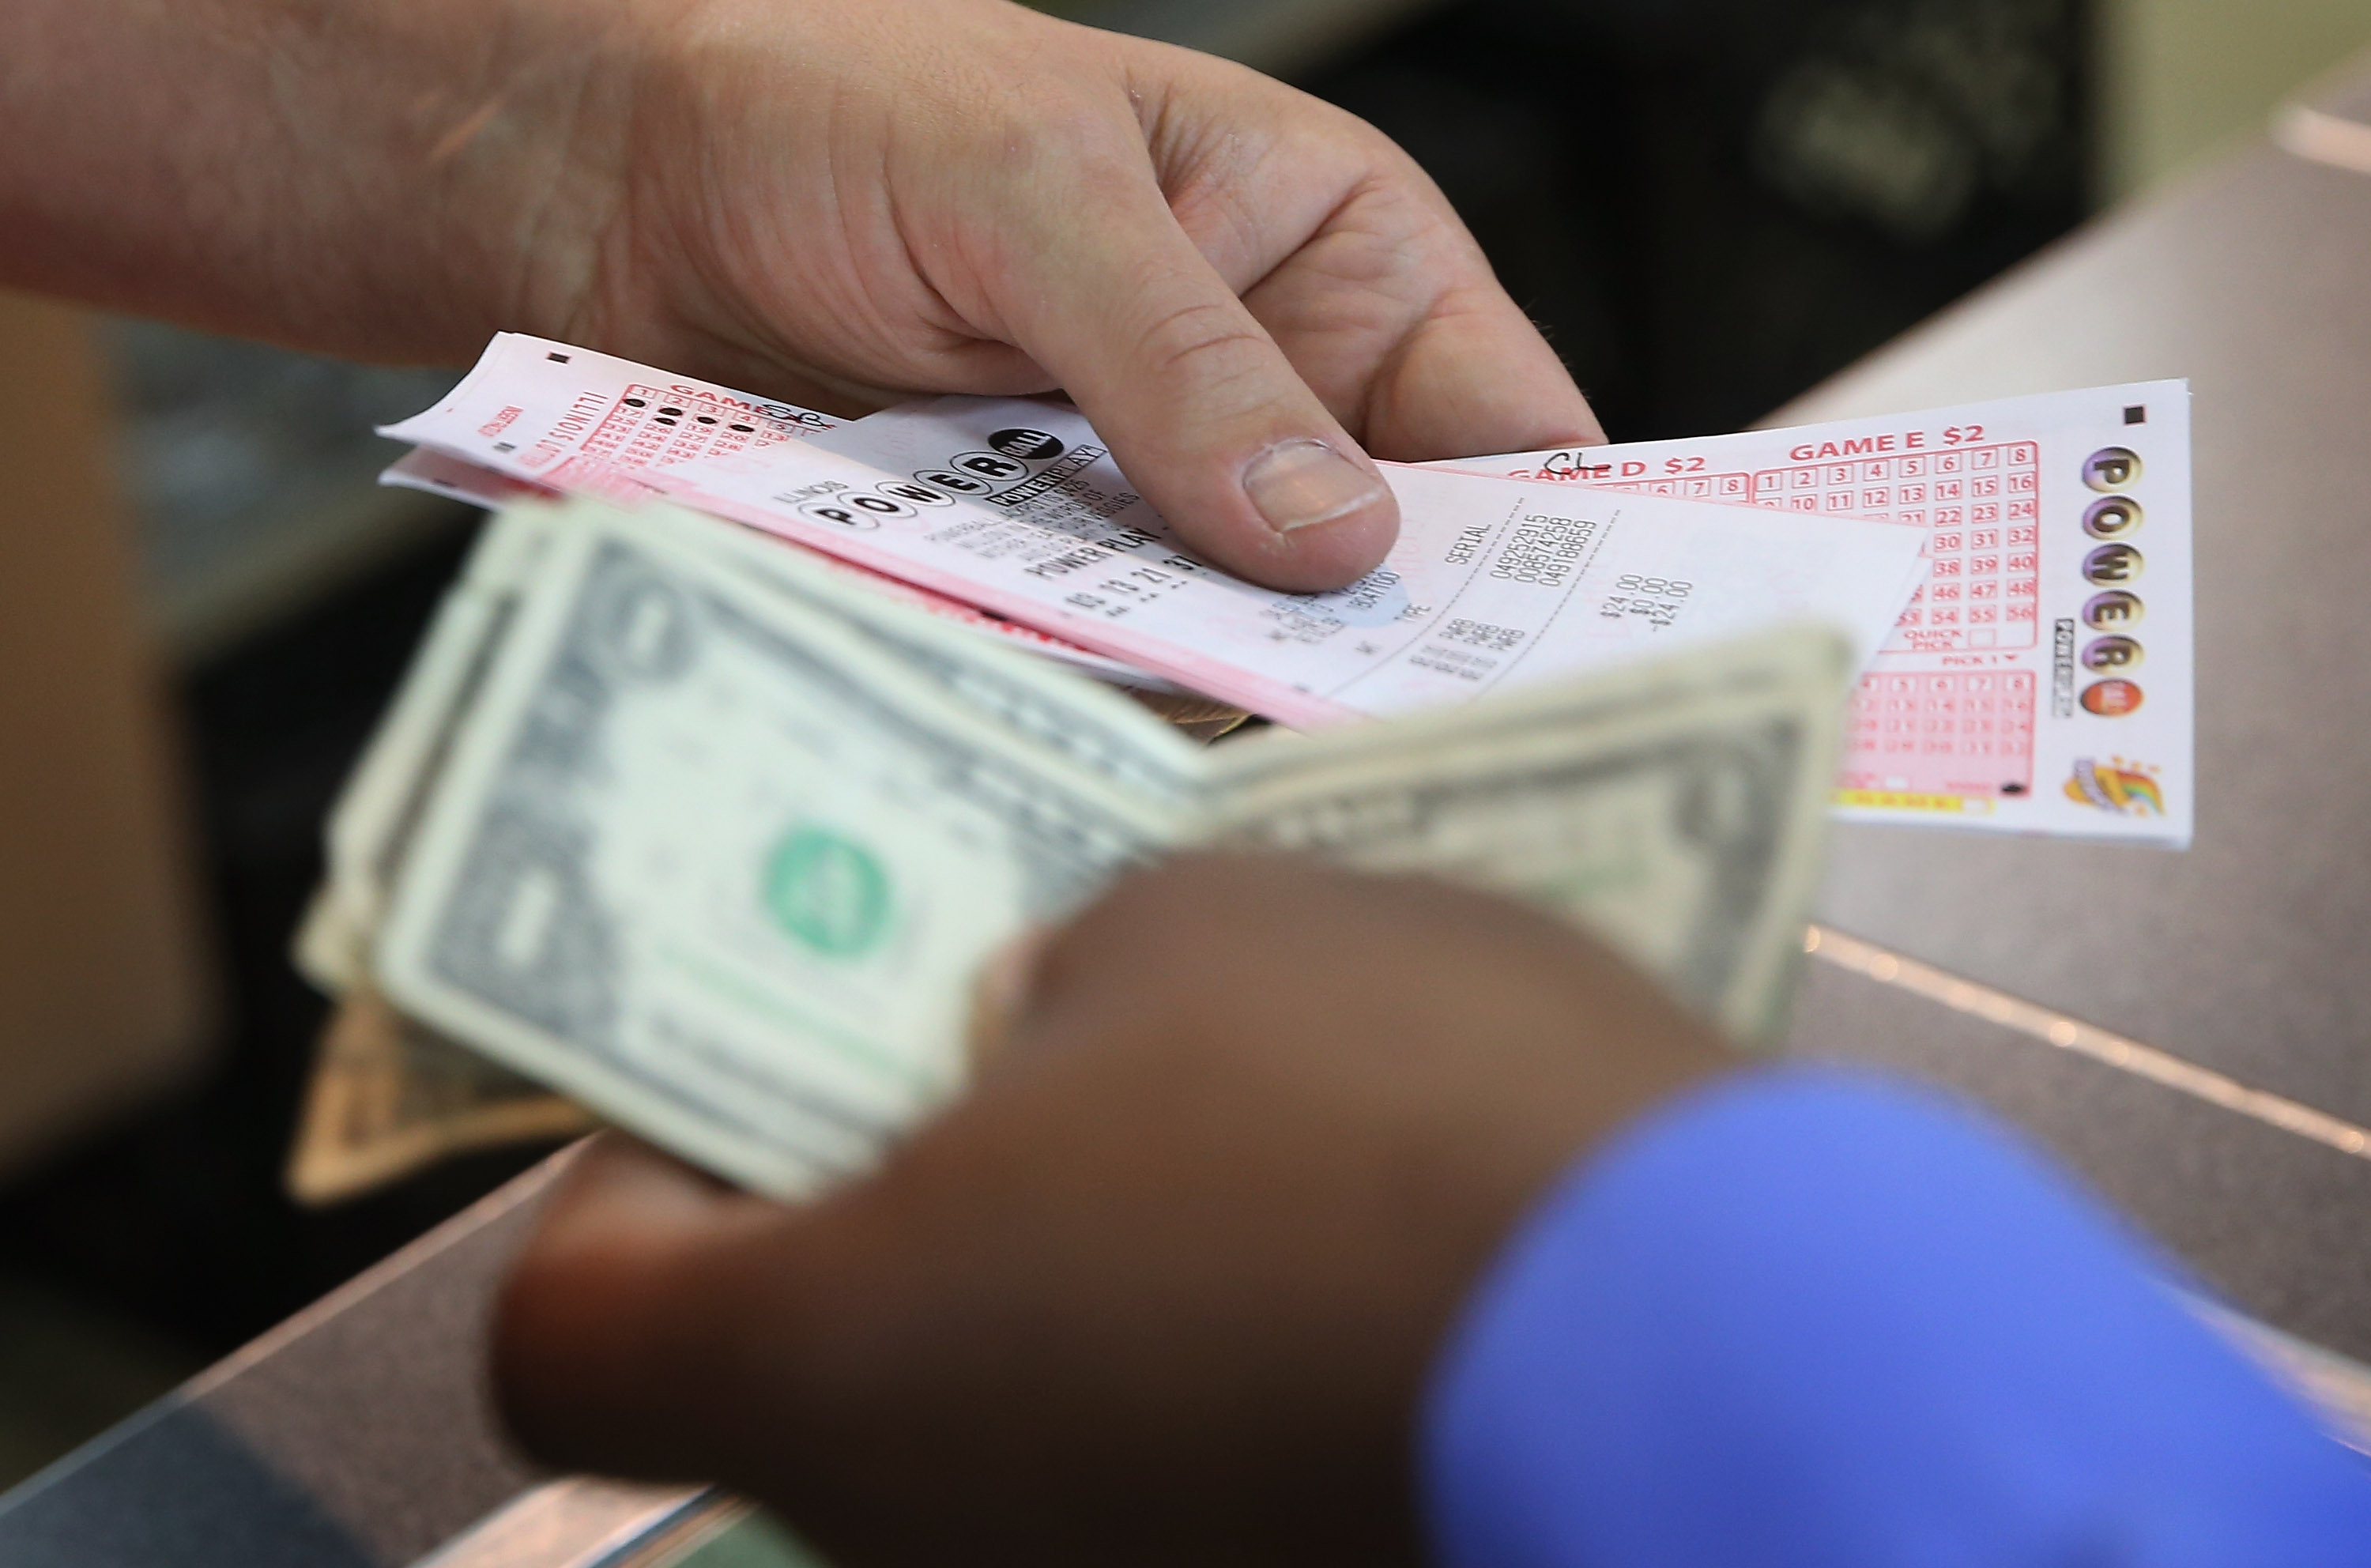 A customer purchases a Powerball lottery ticket on Aug. 7, 2013 in Chicago. (Scott Olson&mdash;Getty Images)